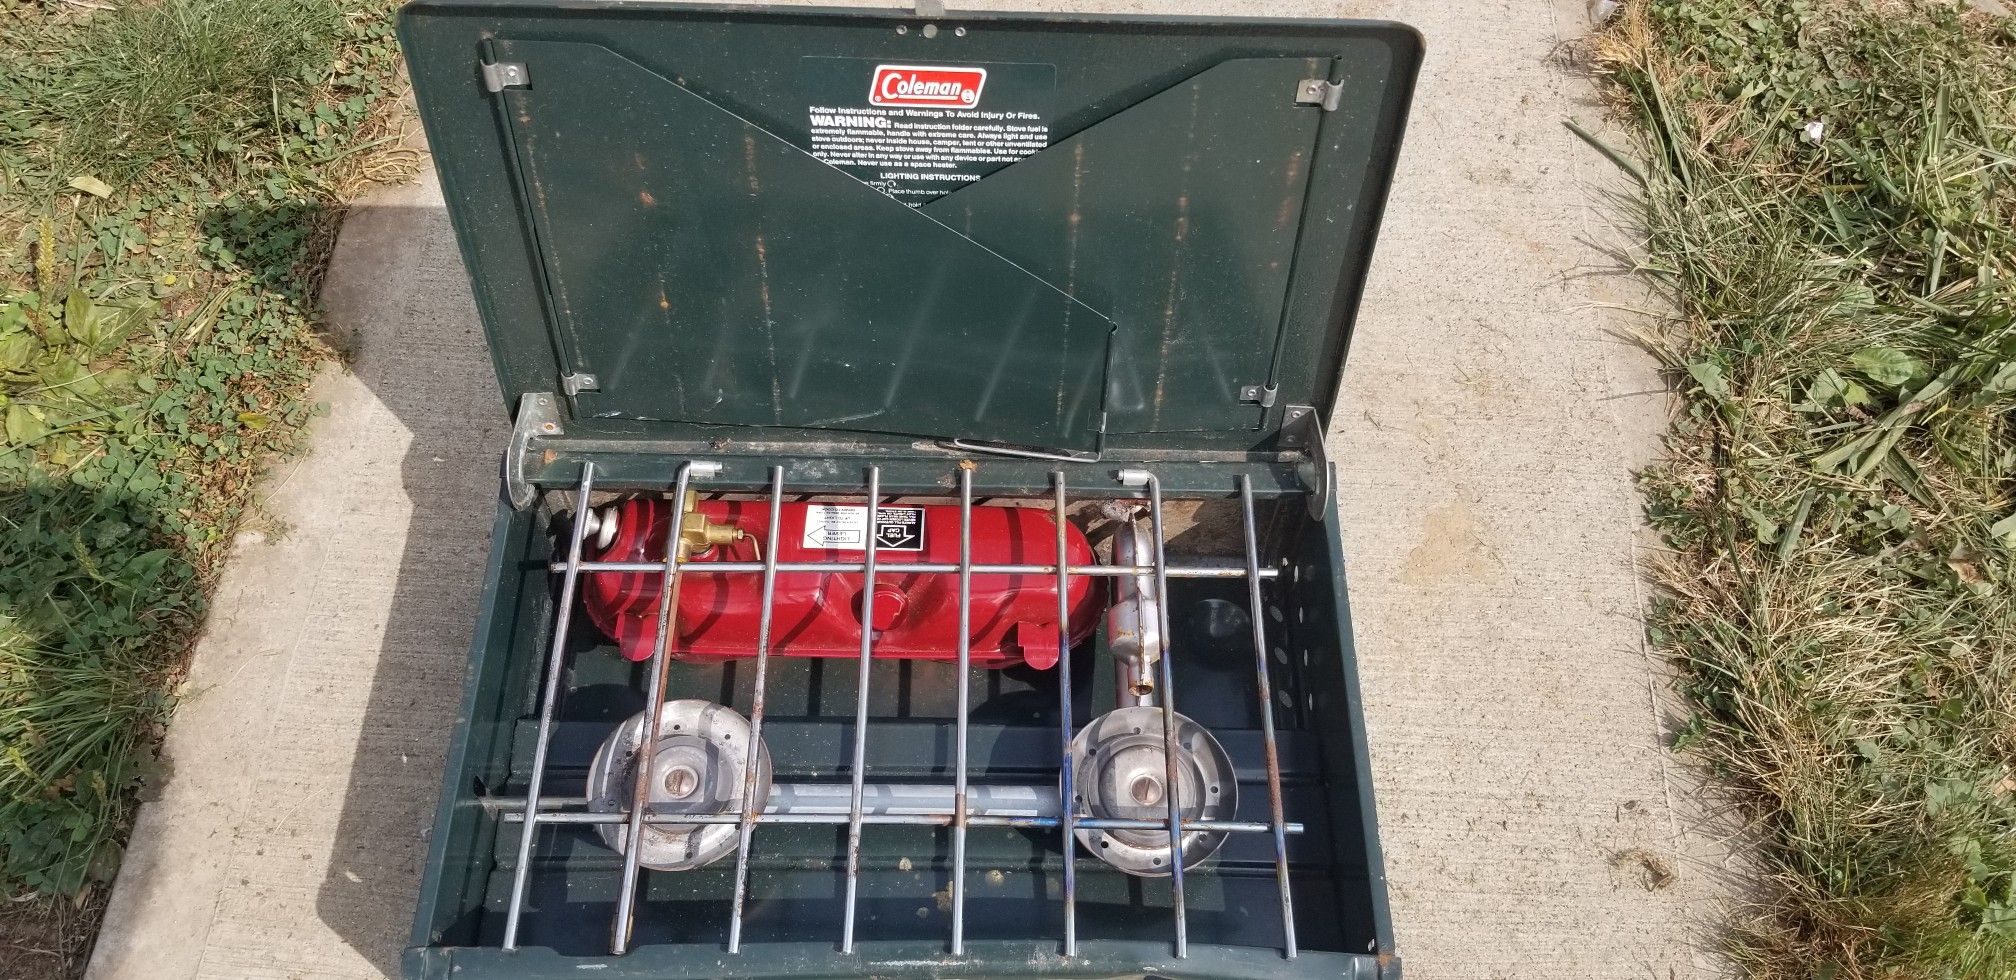 Coleman gas 2 burner Stove 425F - USA. LIKE NEW EXCELLENT CONDITION